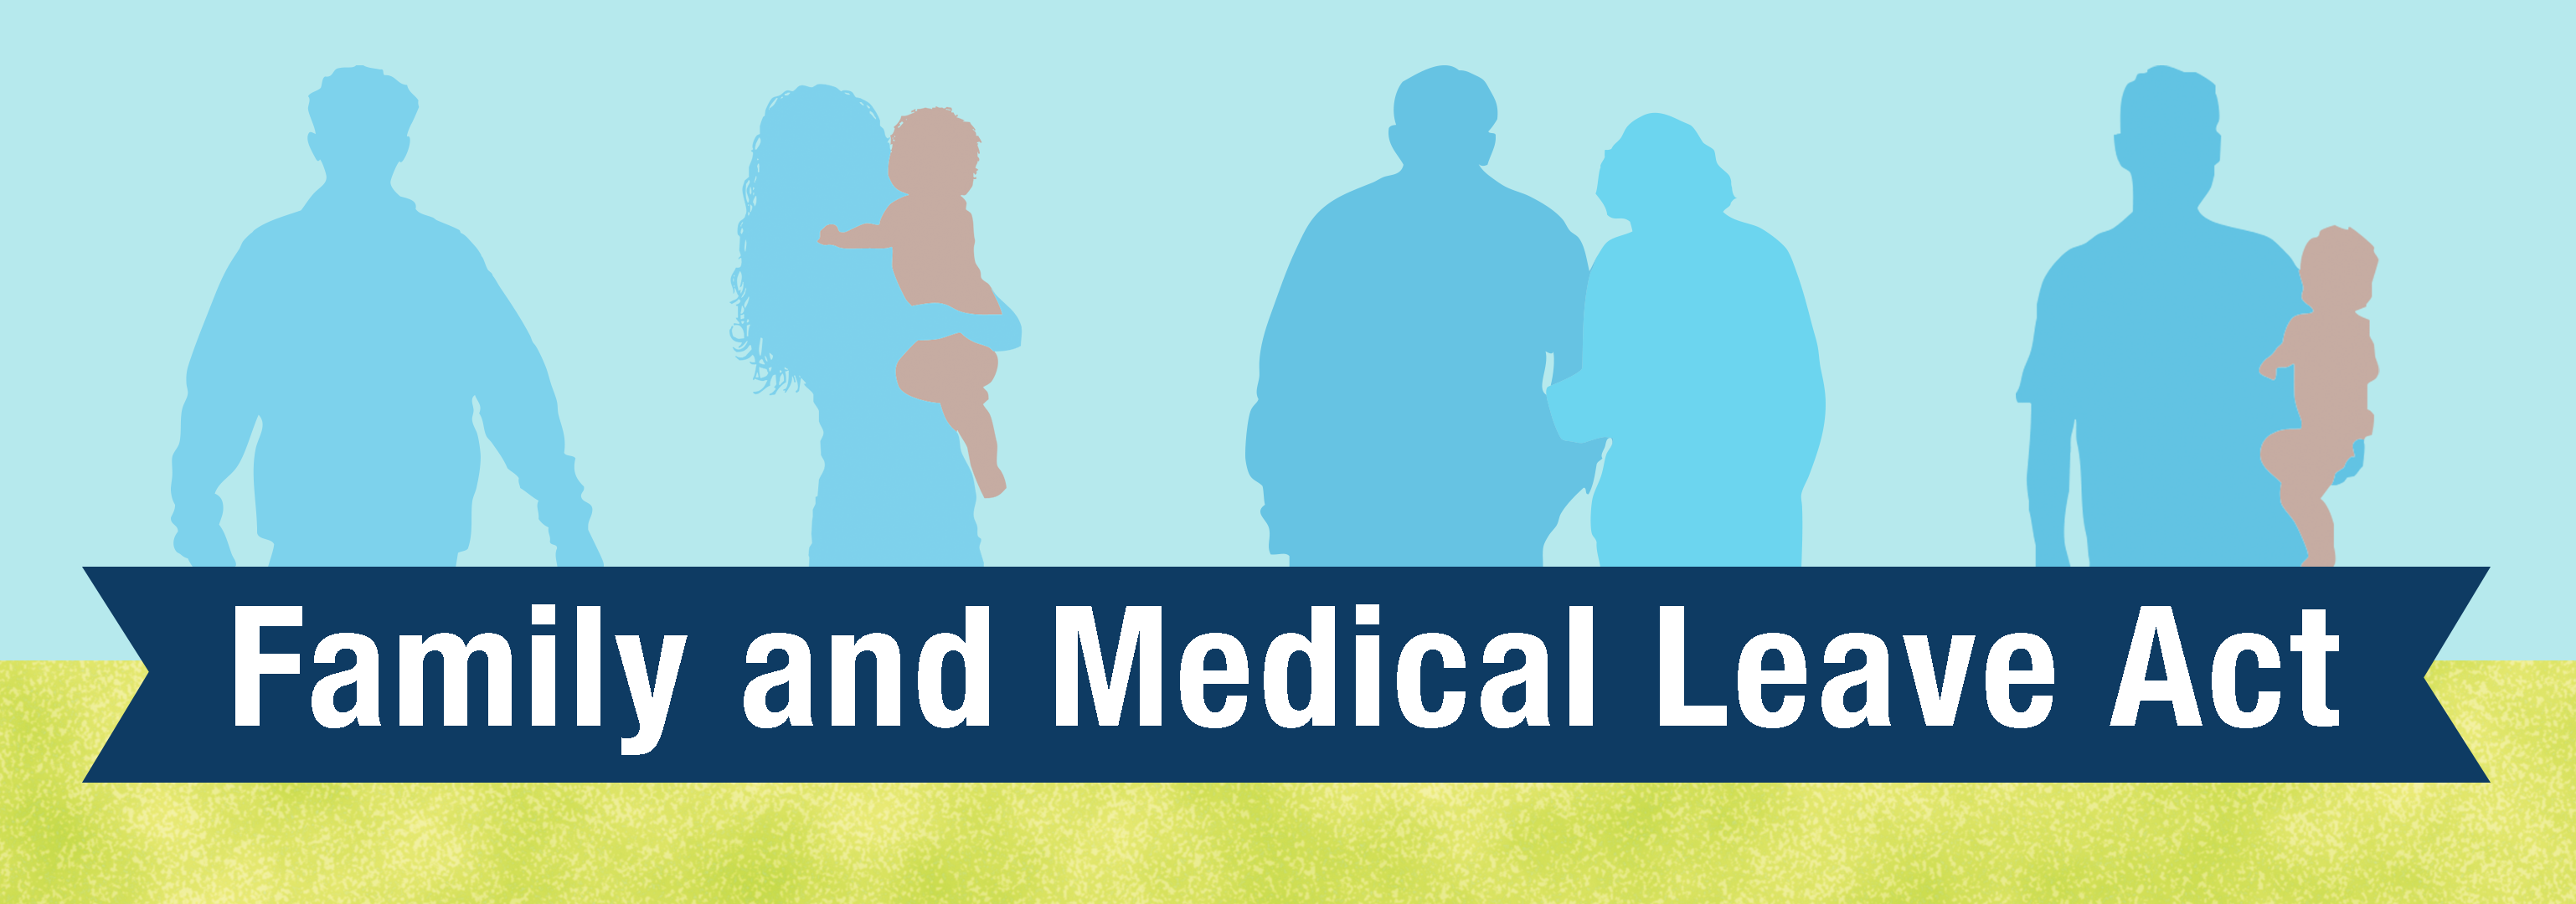 The Family and Medical Leave Act and How Employer's Can Be Compliant